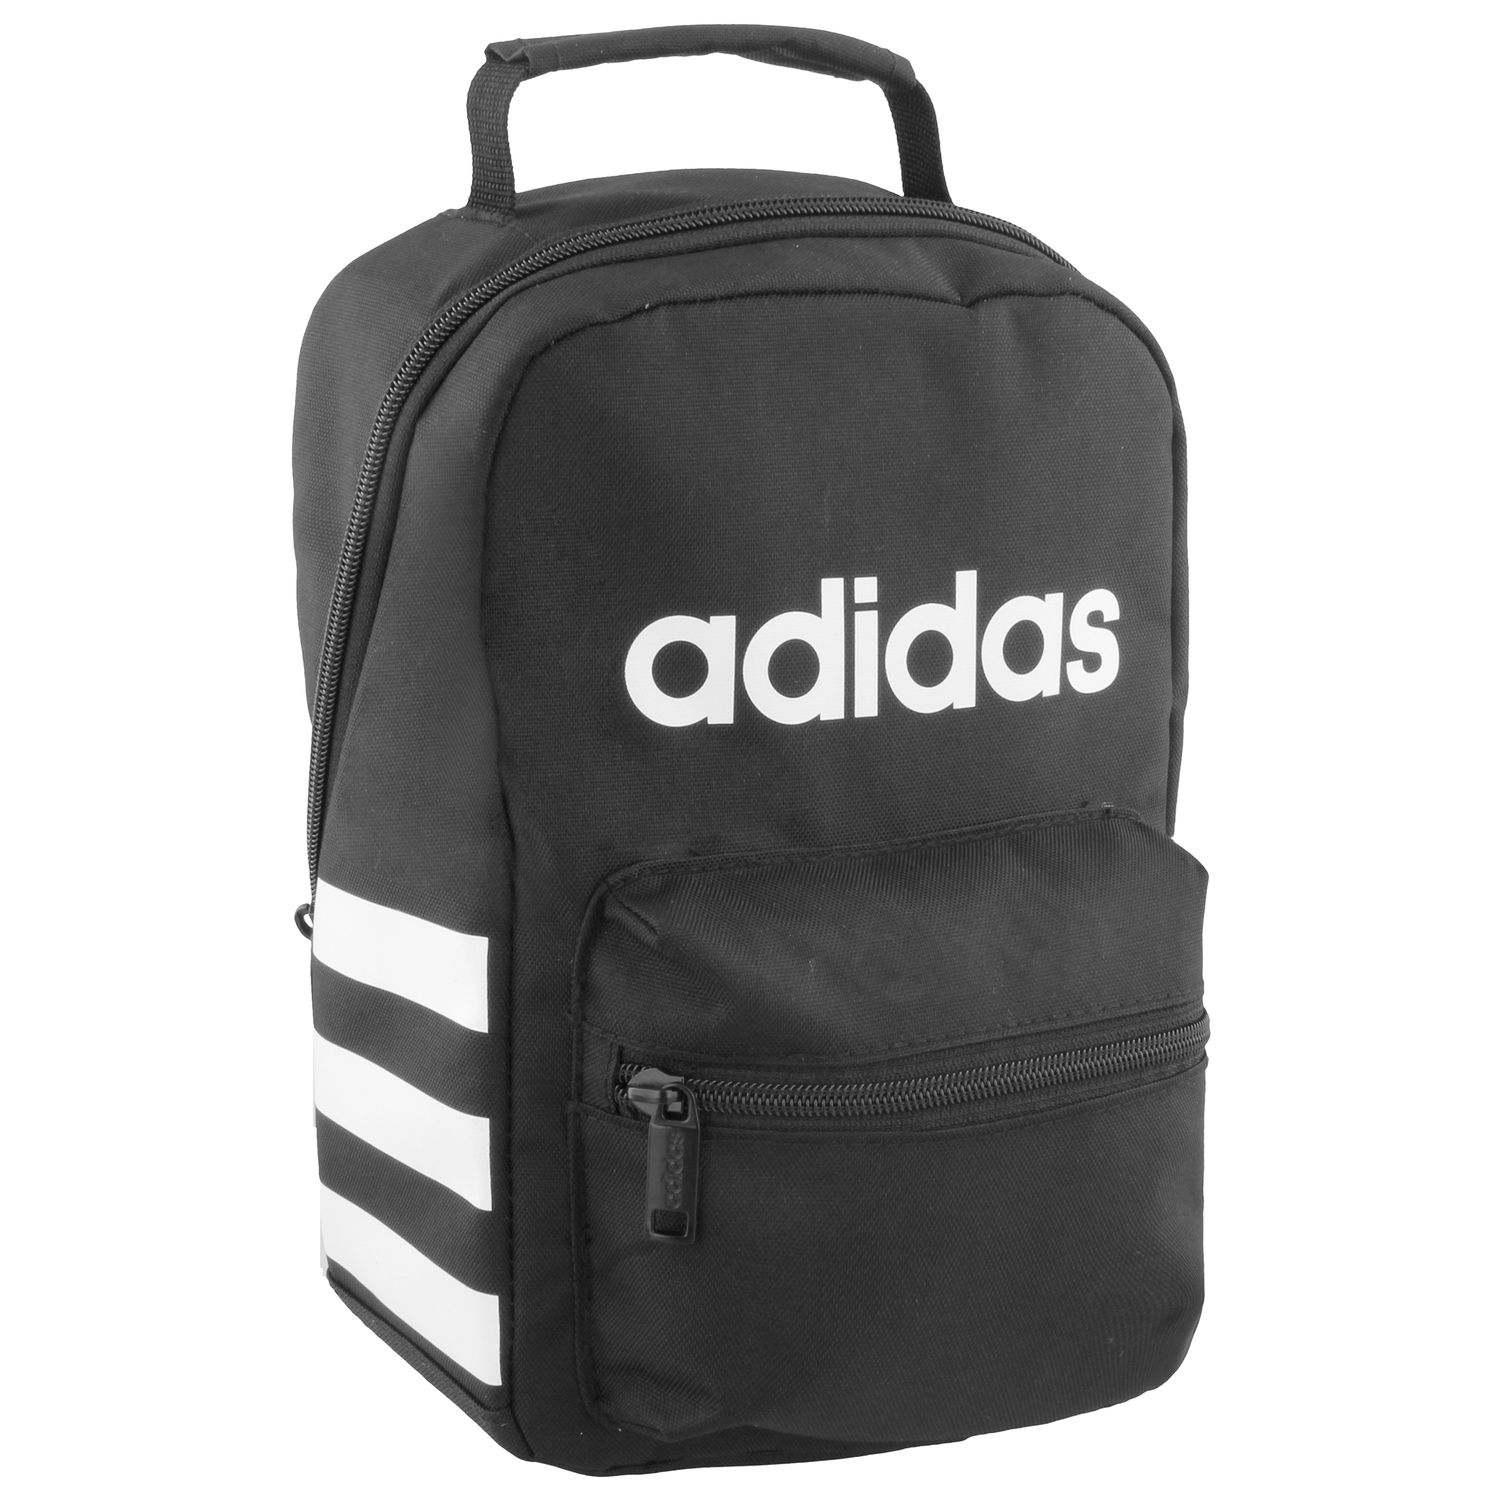 adidas lunchboxes